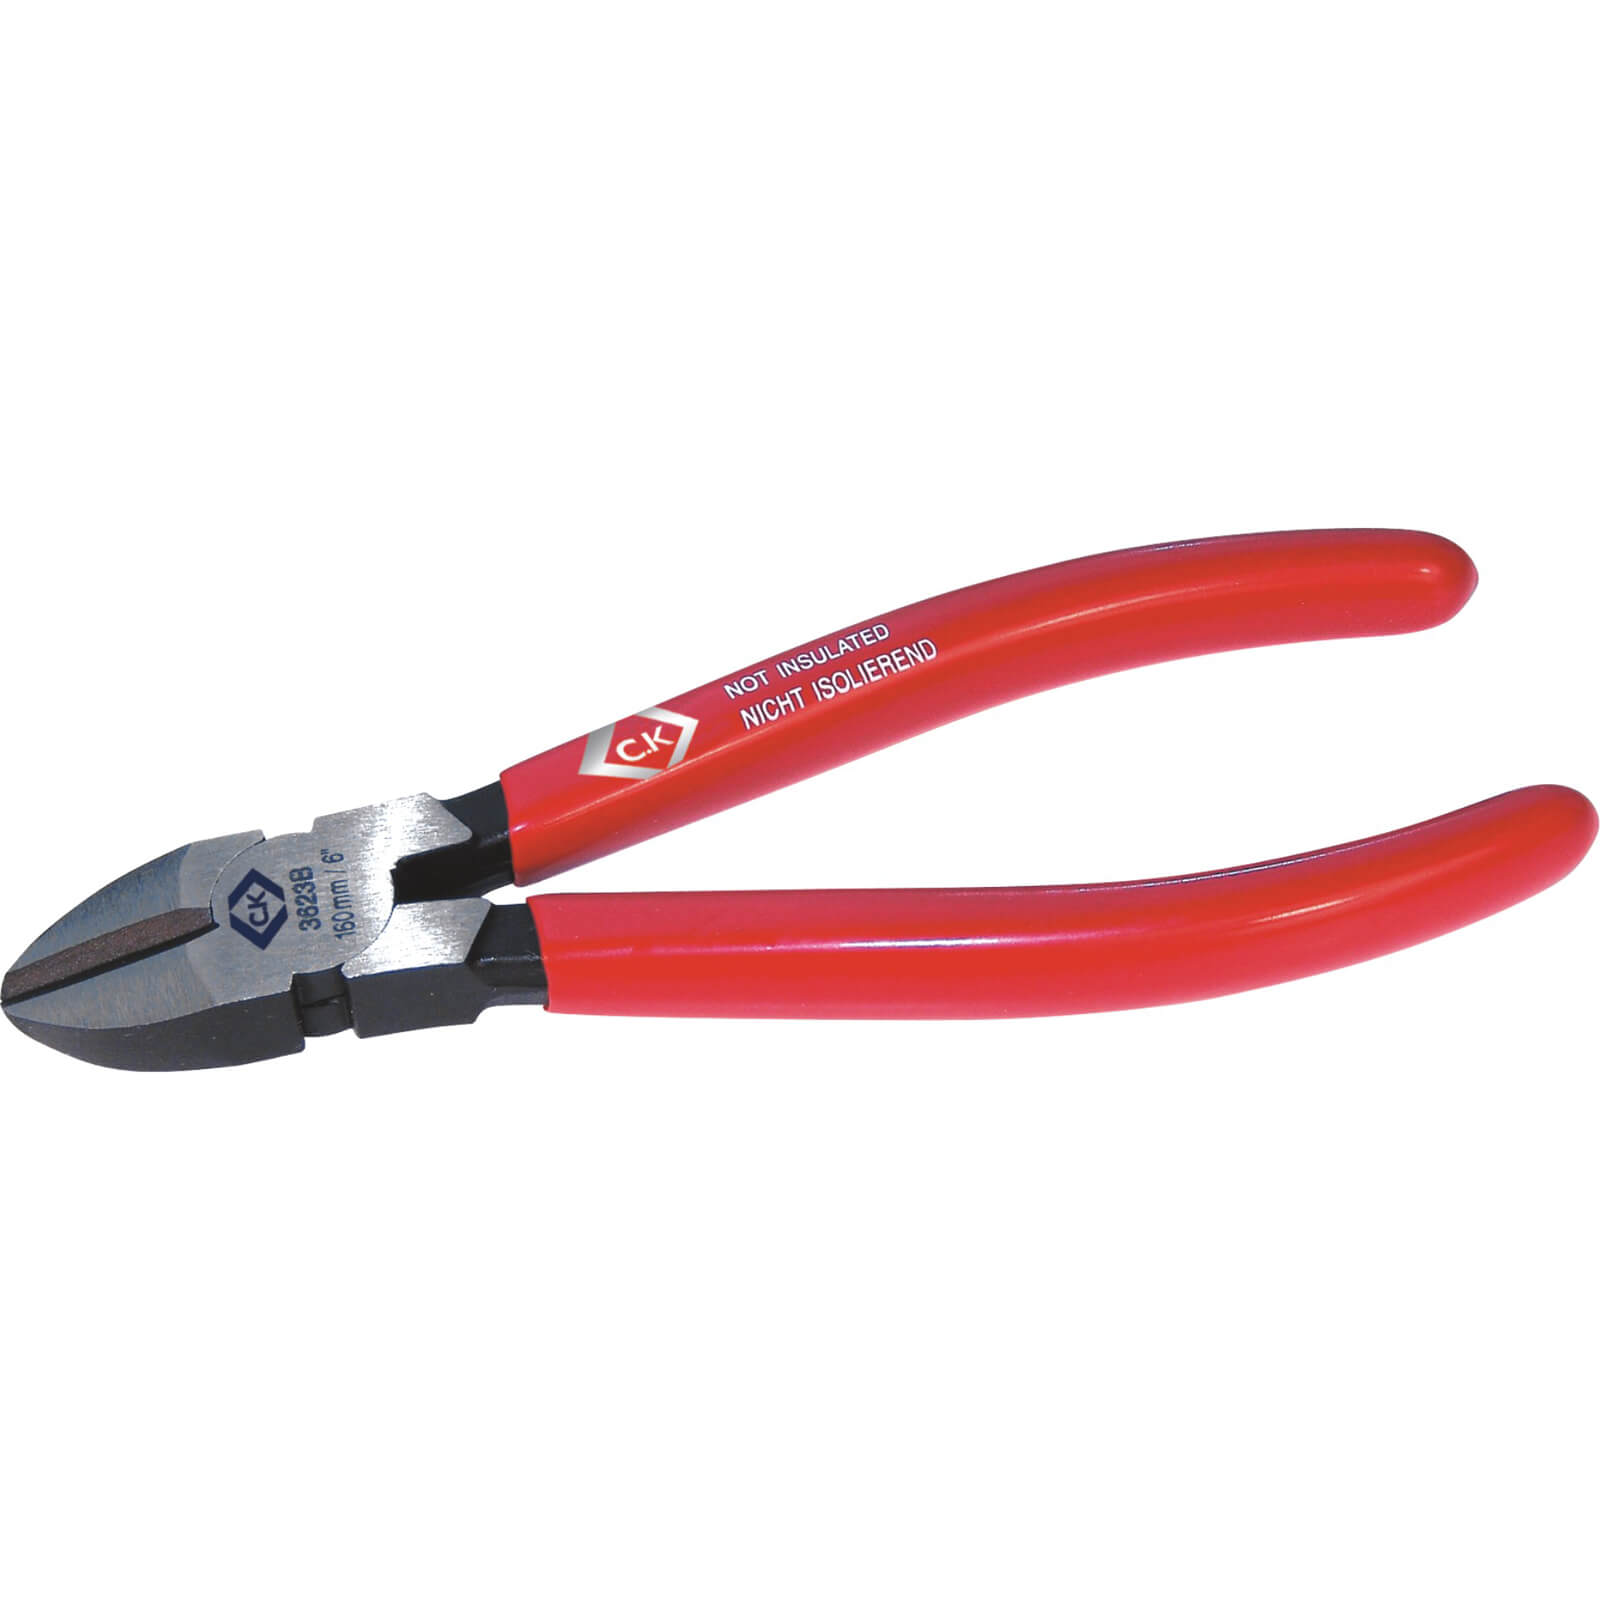 Image of CK T3623B Classic Side Cutters 160mm